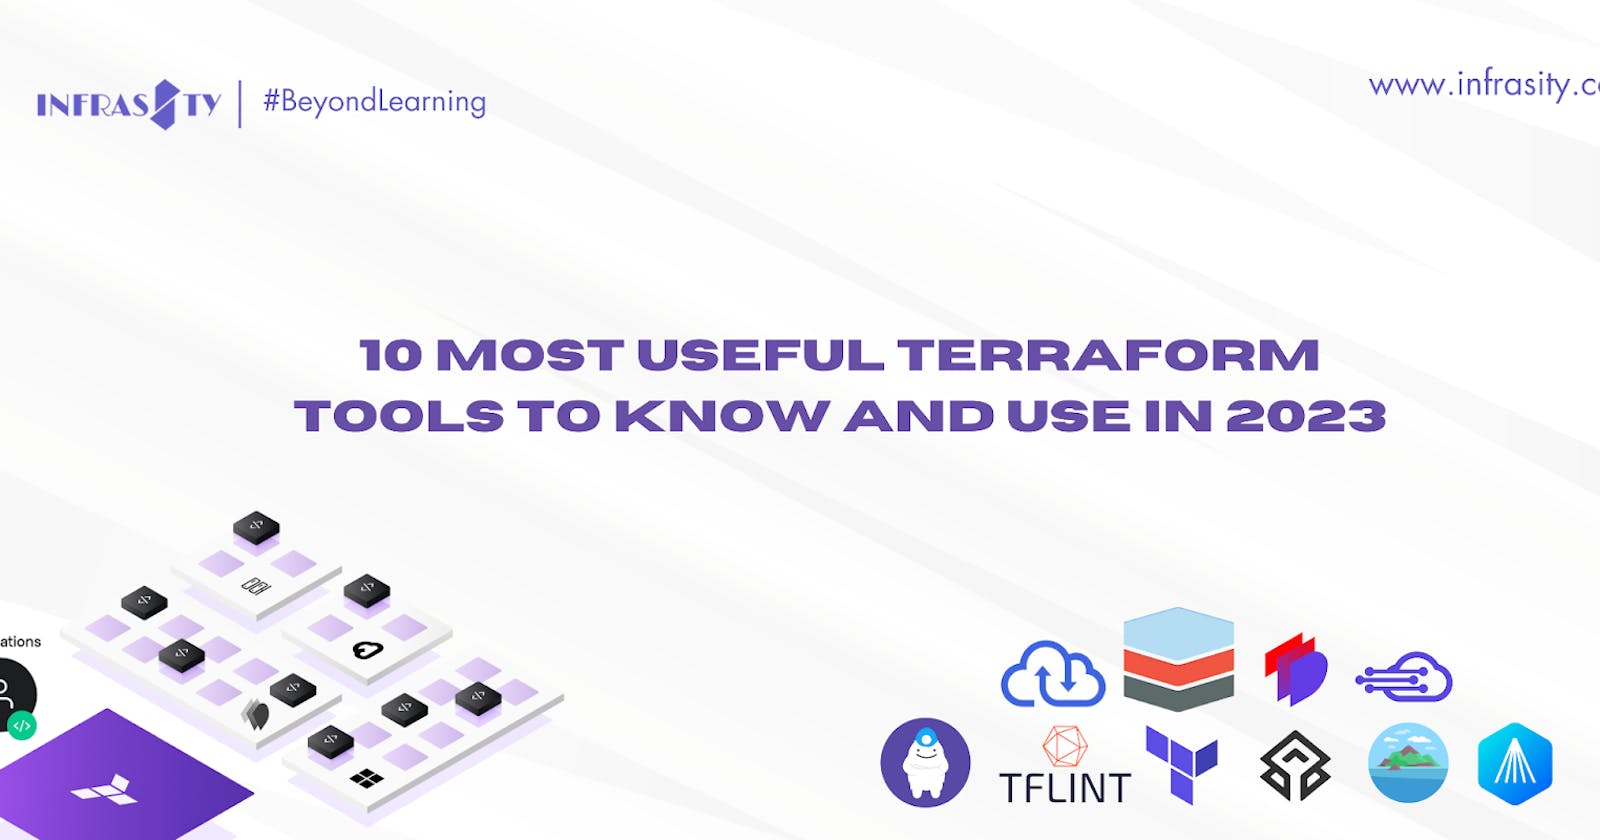 10 Most Useful Terraform Tools to Know and Use in 2023